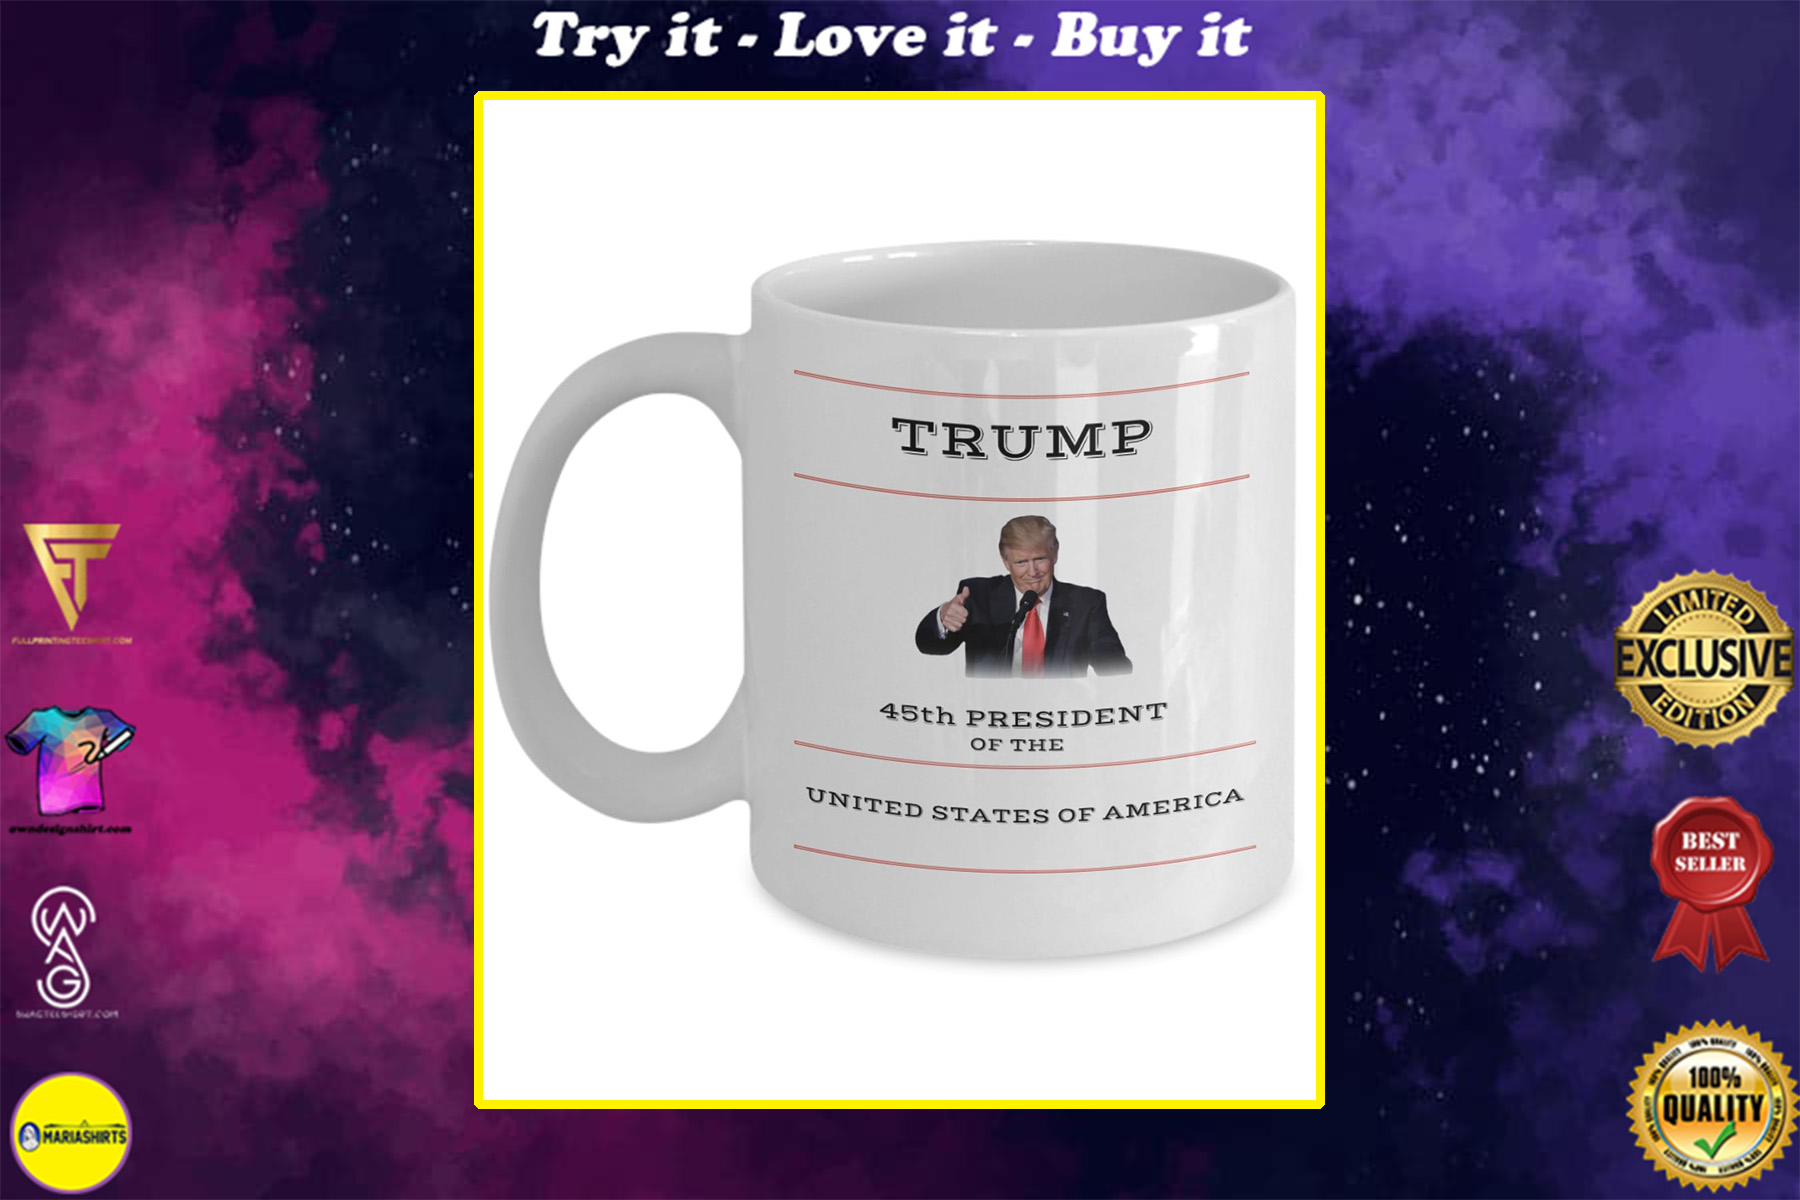 donald trump 45th president of the united states of american mug